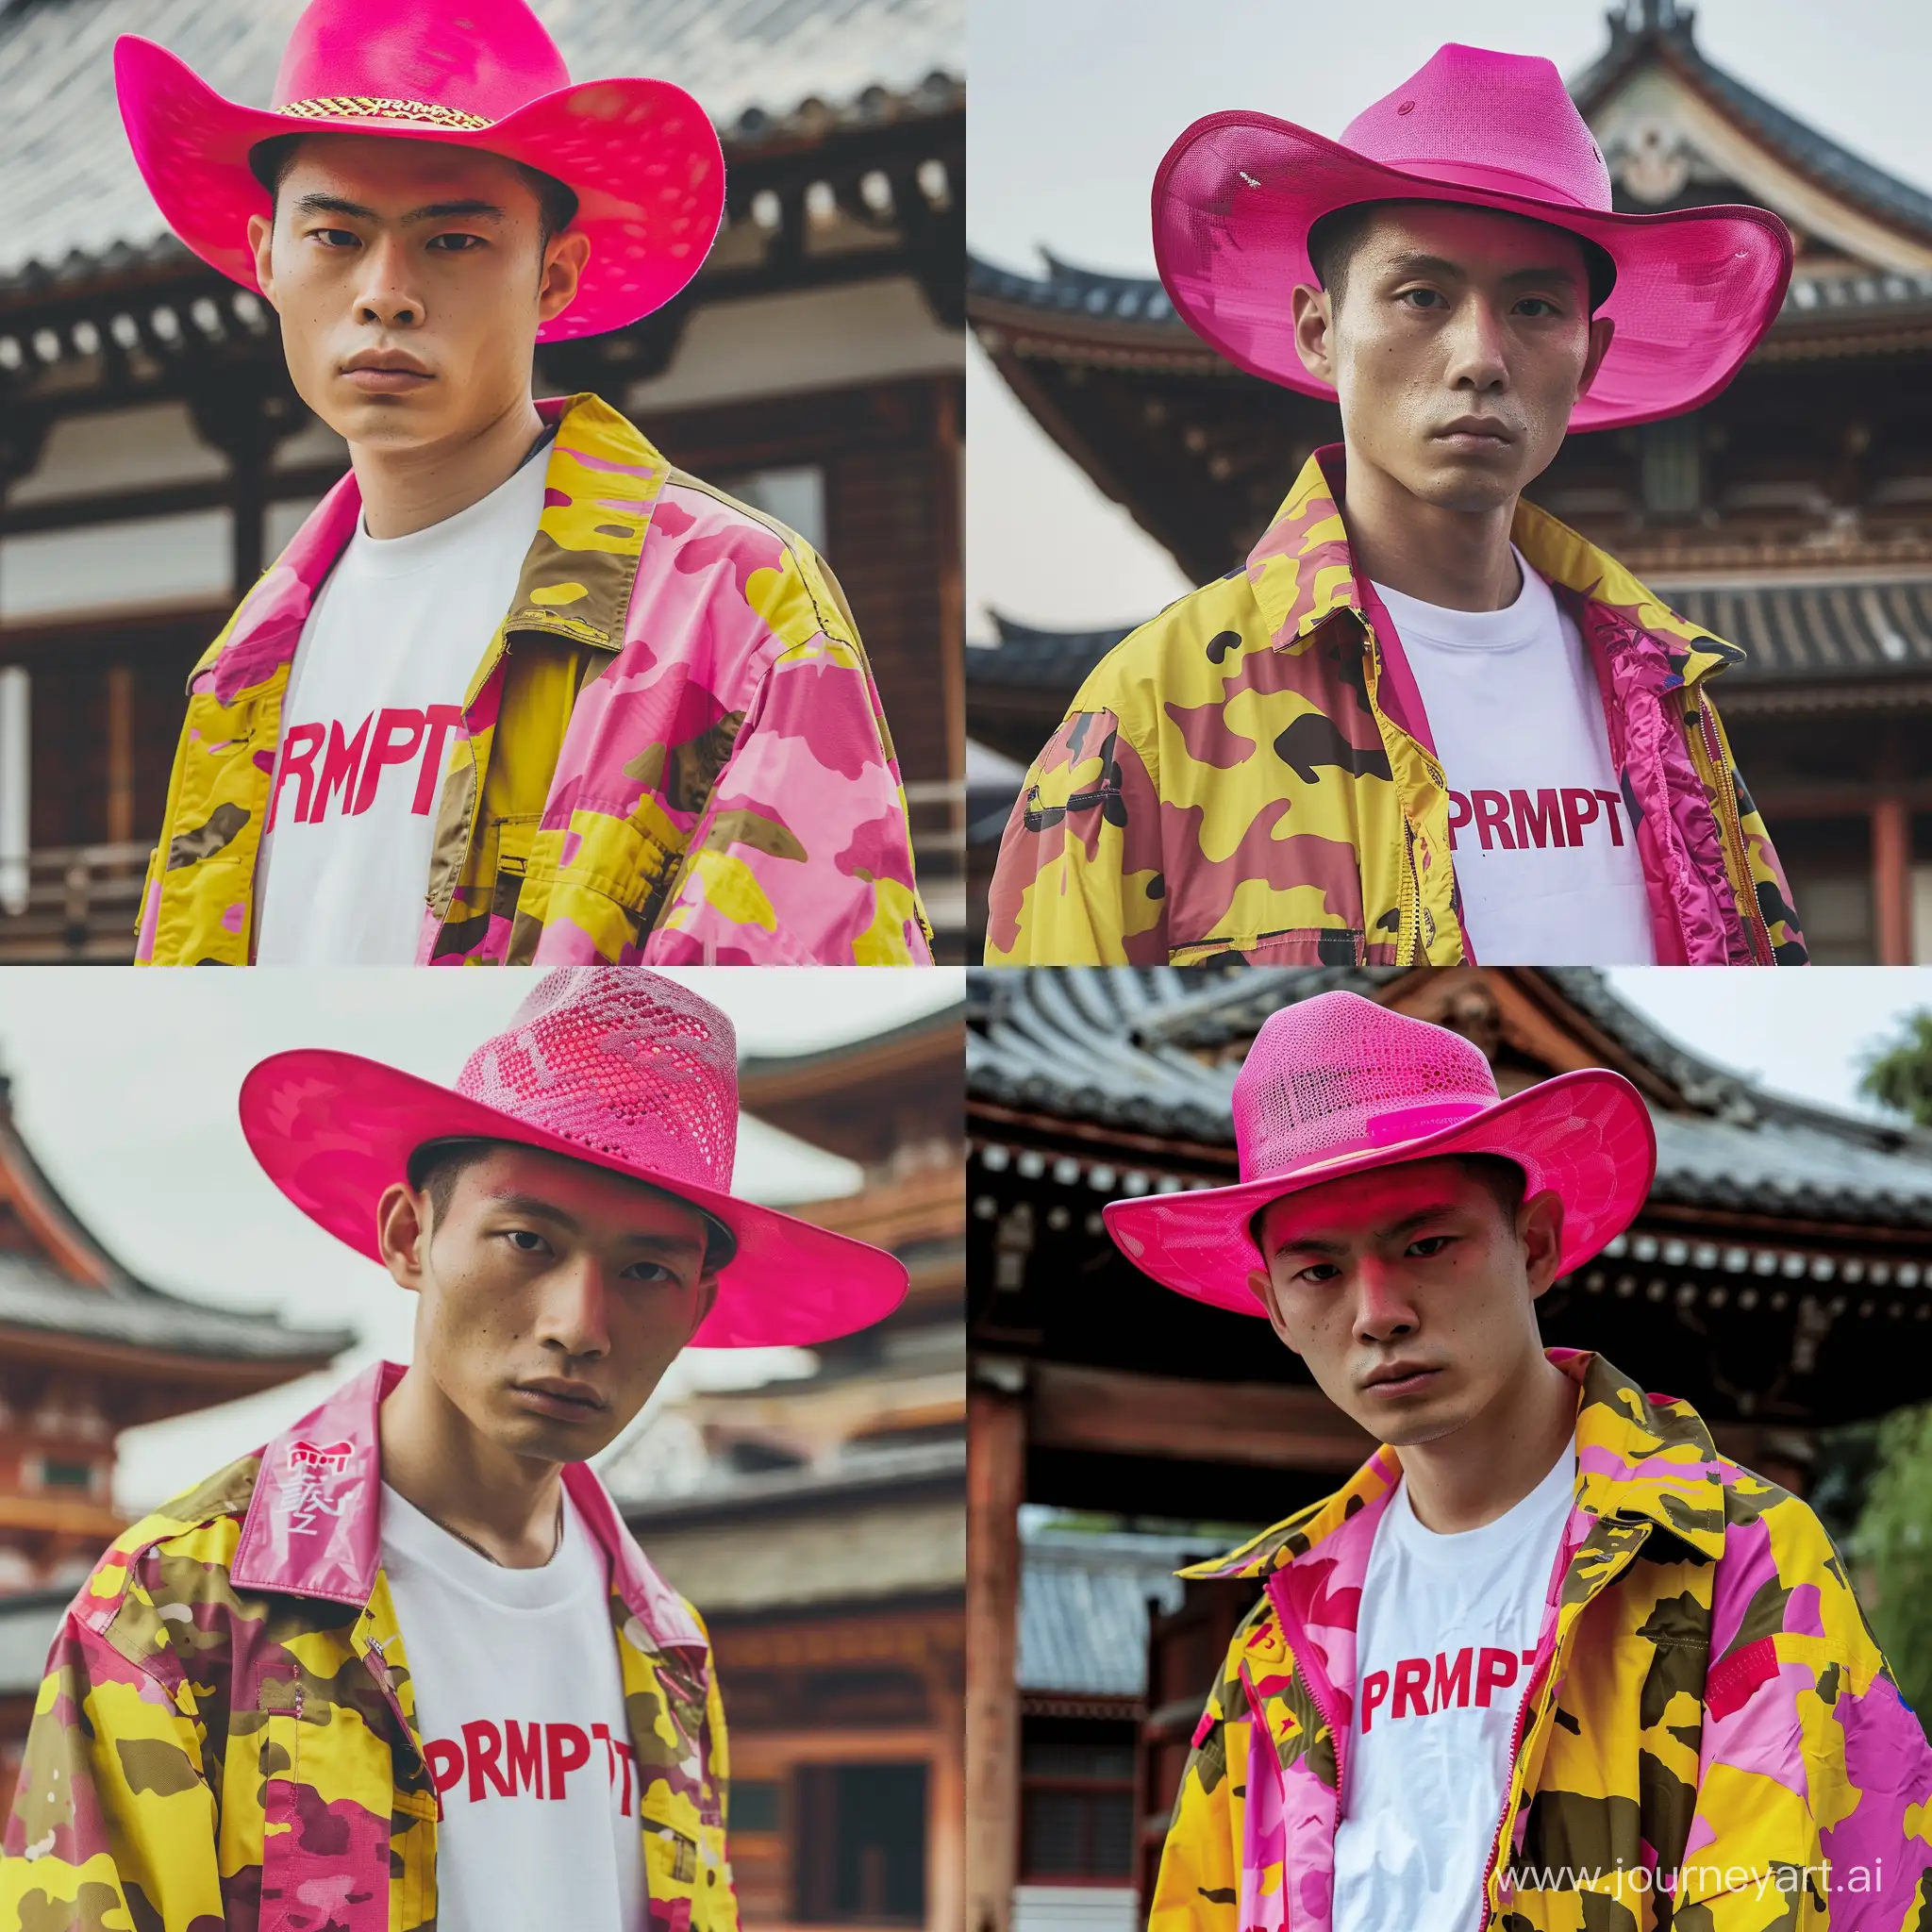 editorial fashion shot,asian ethnicity, male, short black hair, intense gaze, pale complexion,neon pink cowboy hat, vibrant yellow and pink camo jacket, white tee with red “PRMPT” branding ,traditional Japanese temple backdrop,high contrast daylight, vivid and playful mood